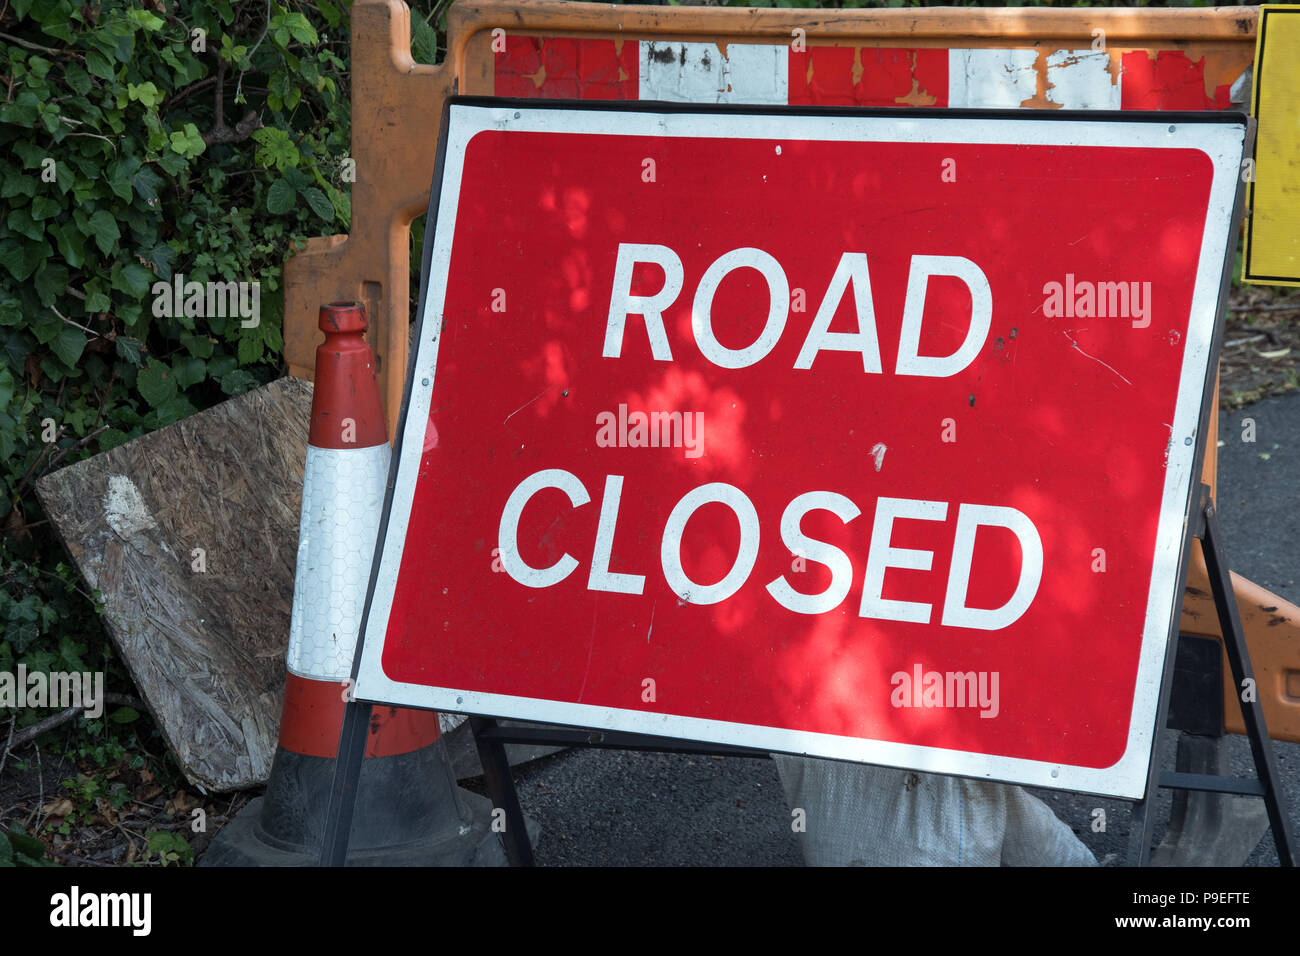 Road closed sign in the UK Stock Photo